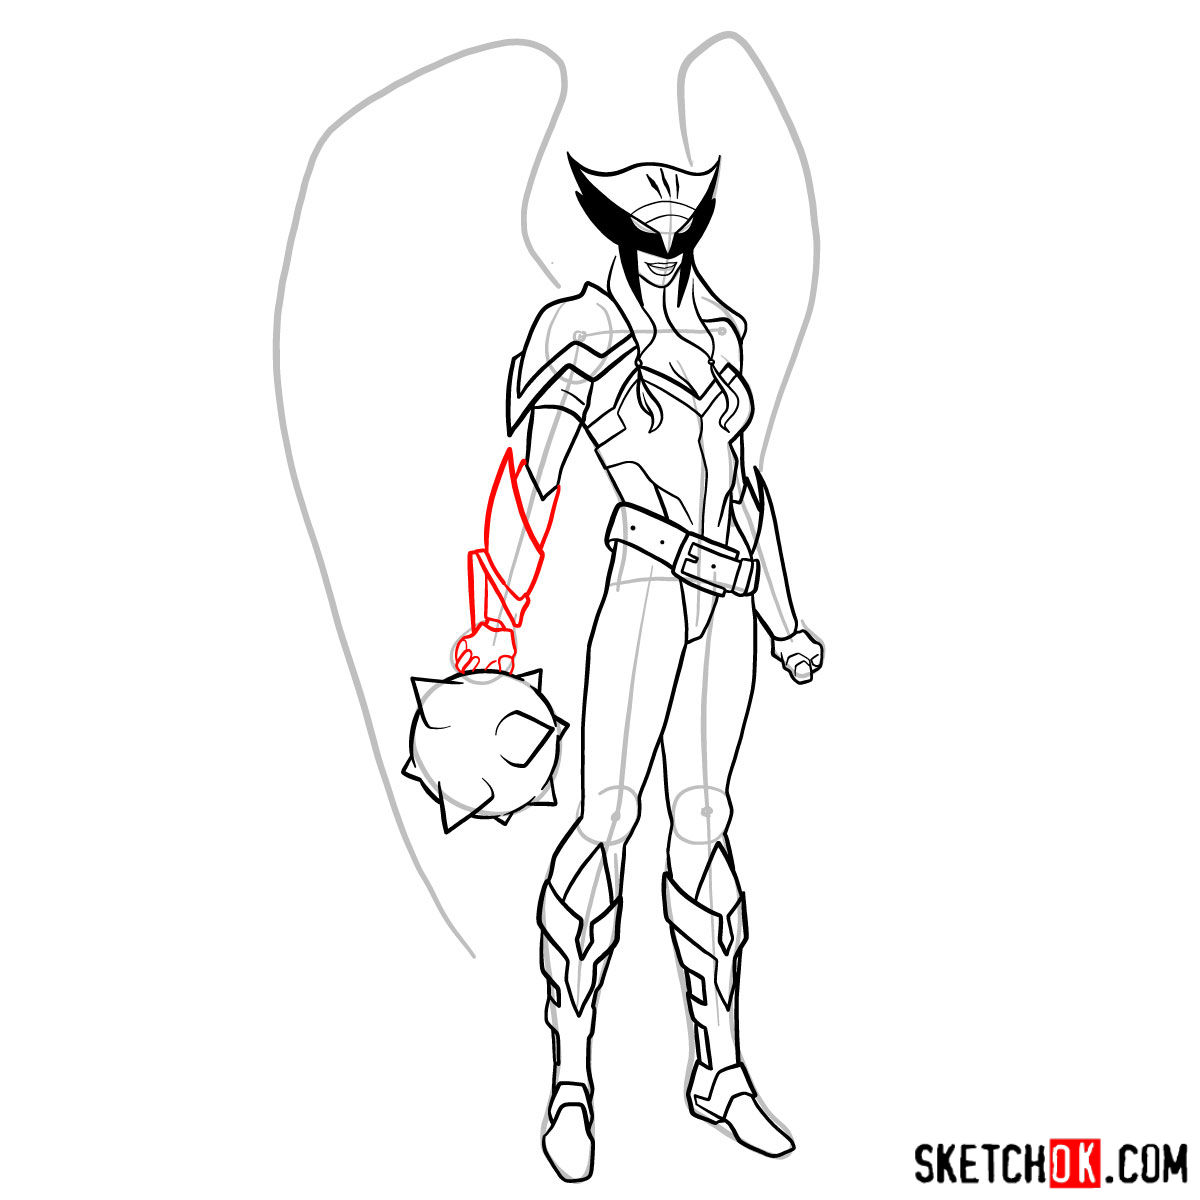 How to draw Hawkgirl DC superheroine - step 14